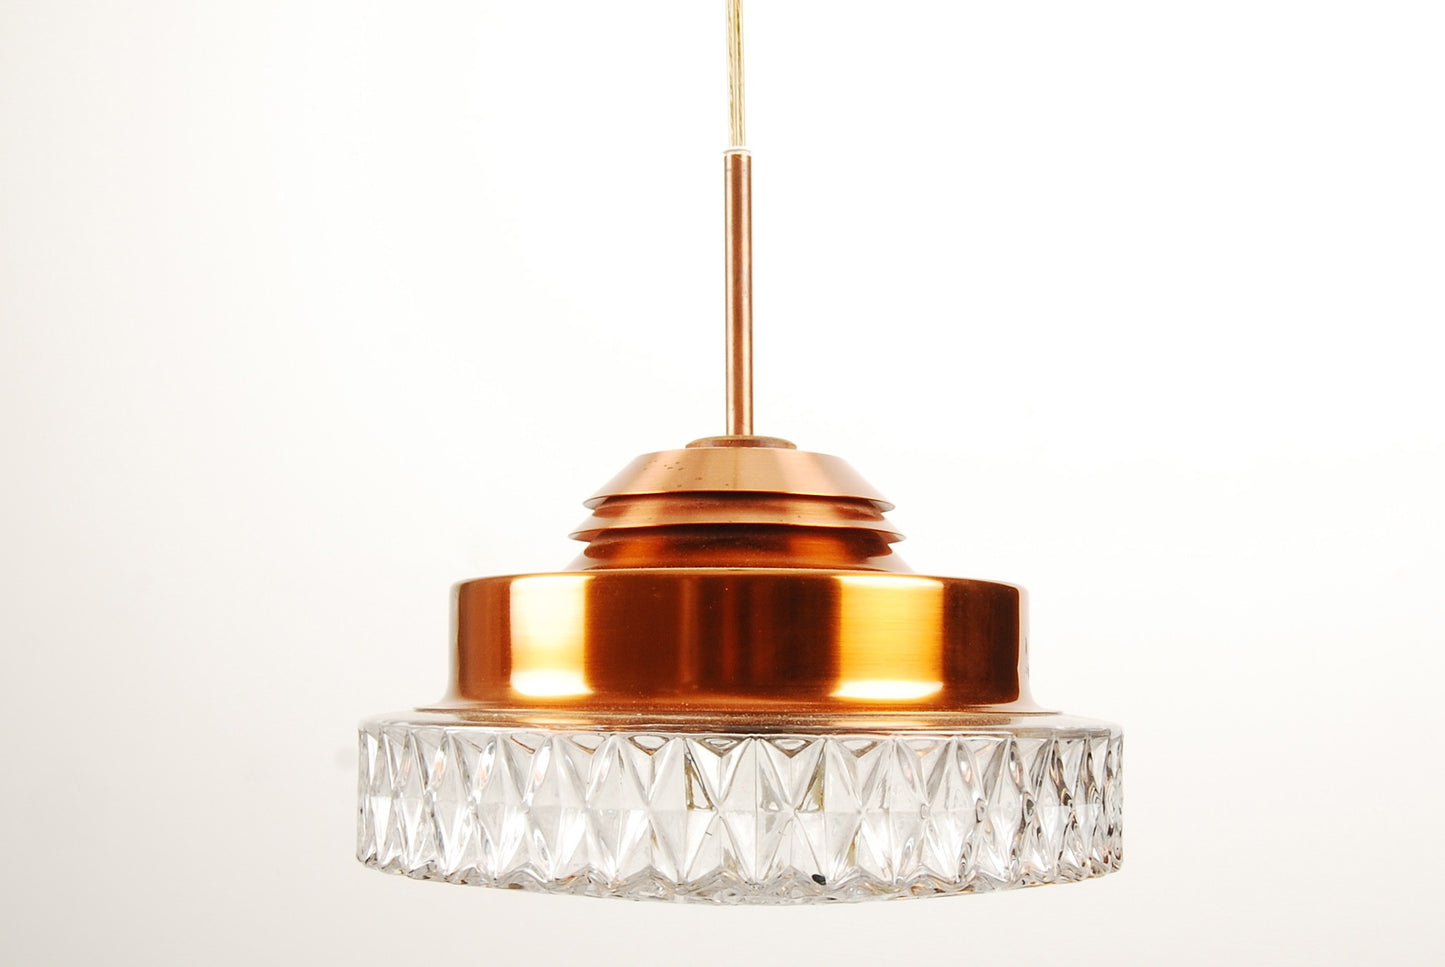 Copper and glass ceiling light